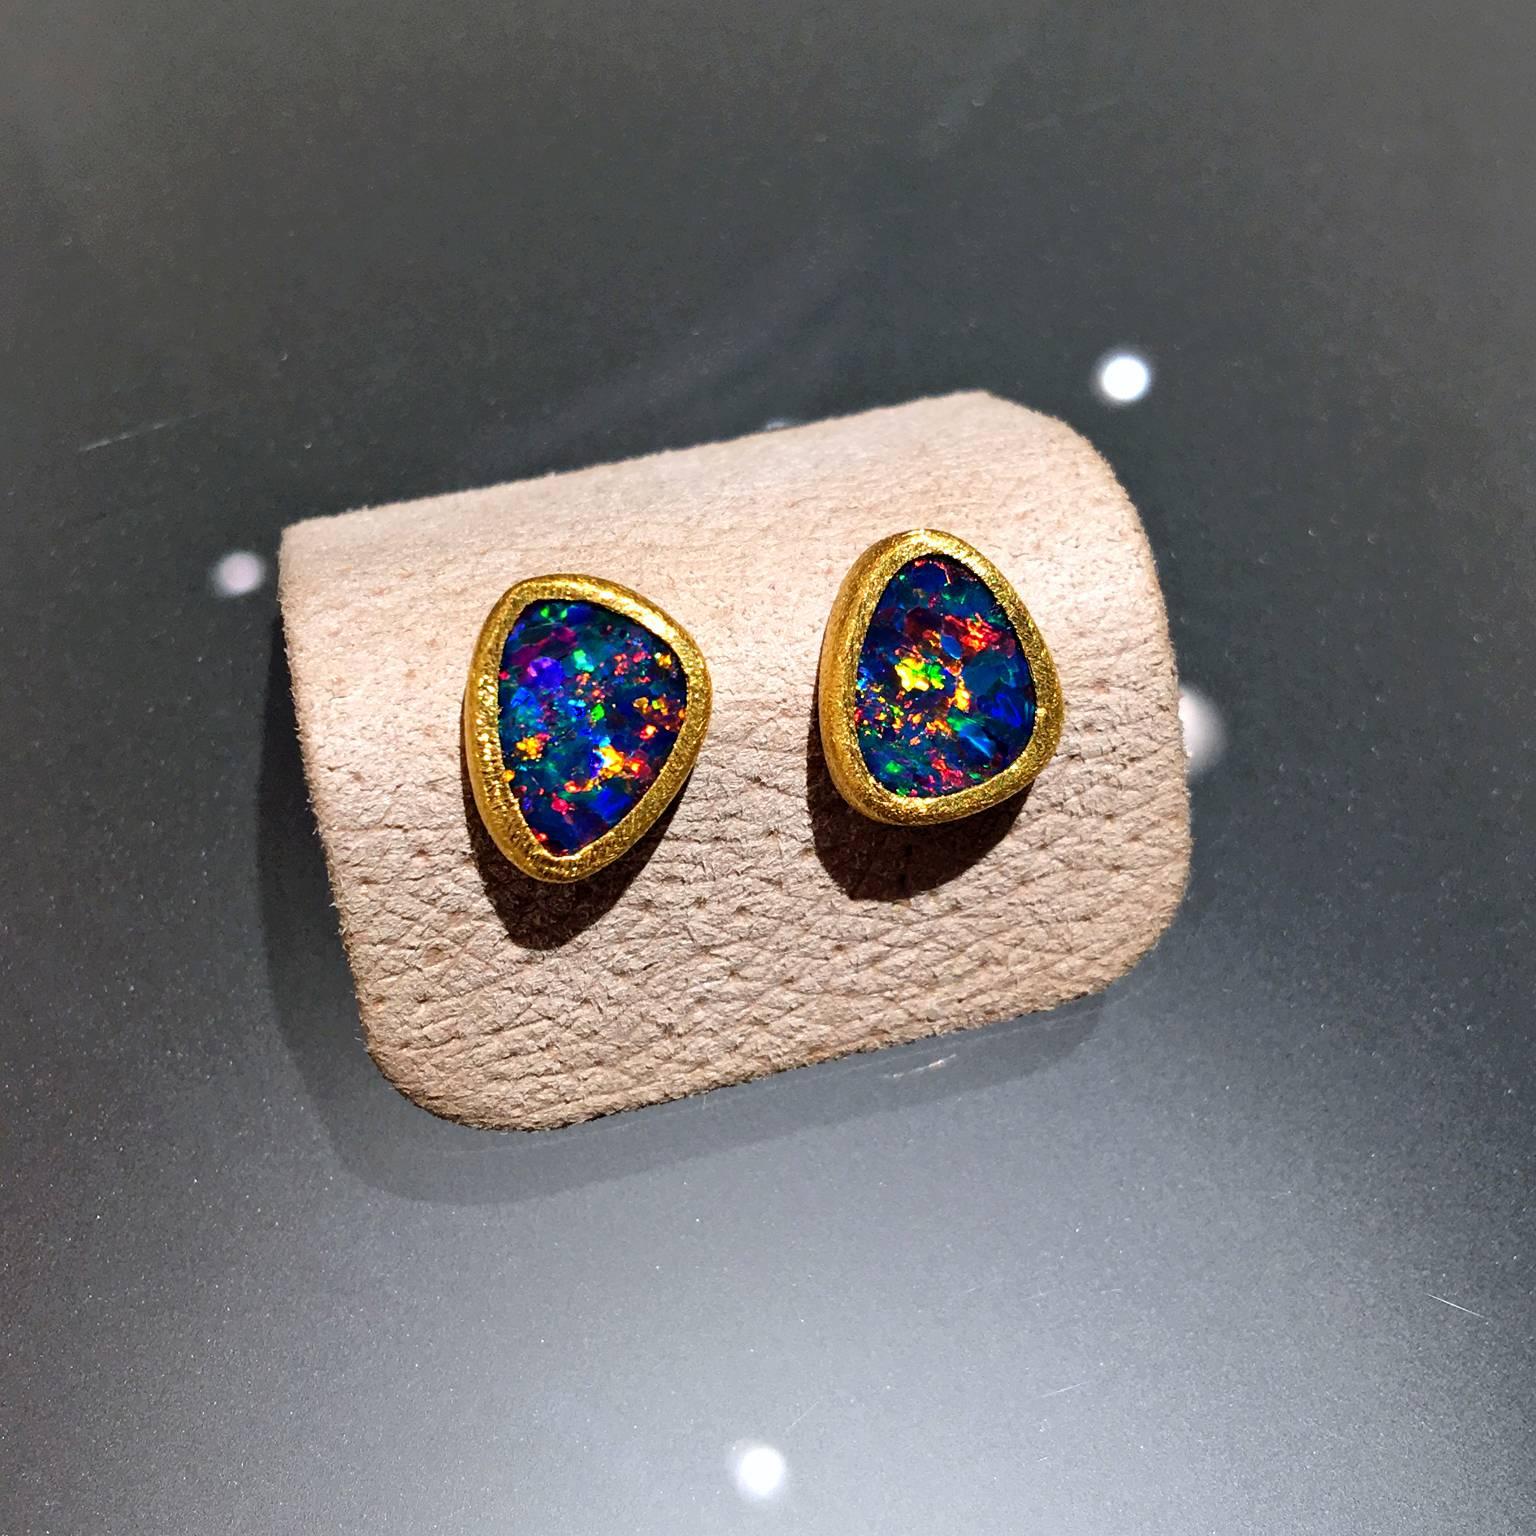 One-of-a-Kind Stud Earrings handcrafted by acclaimed jewelry designer Devta Doolan with bluish violet opal doublets exhibiting a unique and vibrant rare red flash with electrifying accents of green, orange, blue, yellow, violet, and purple fire. The